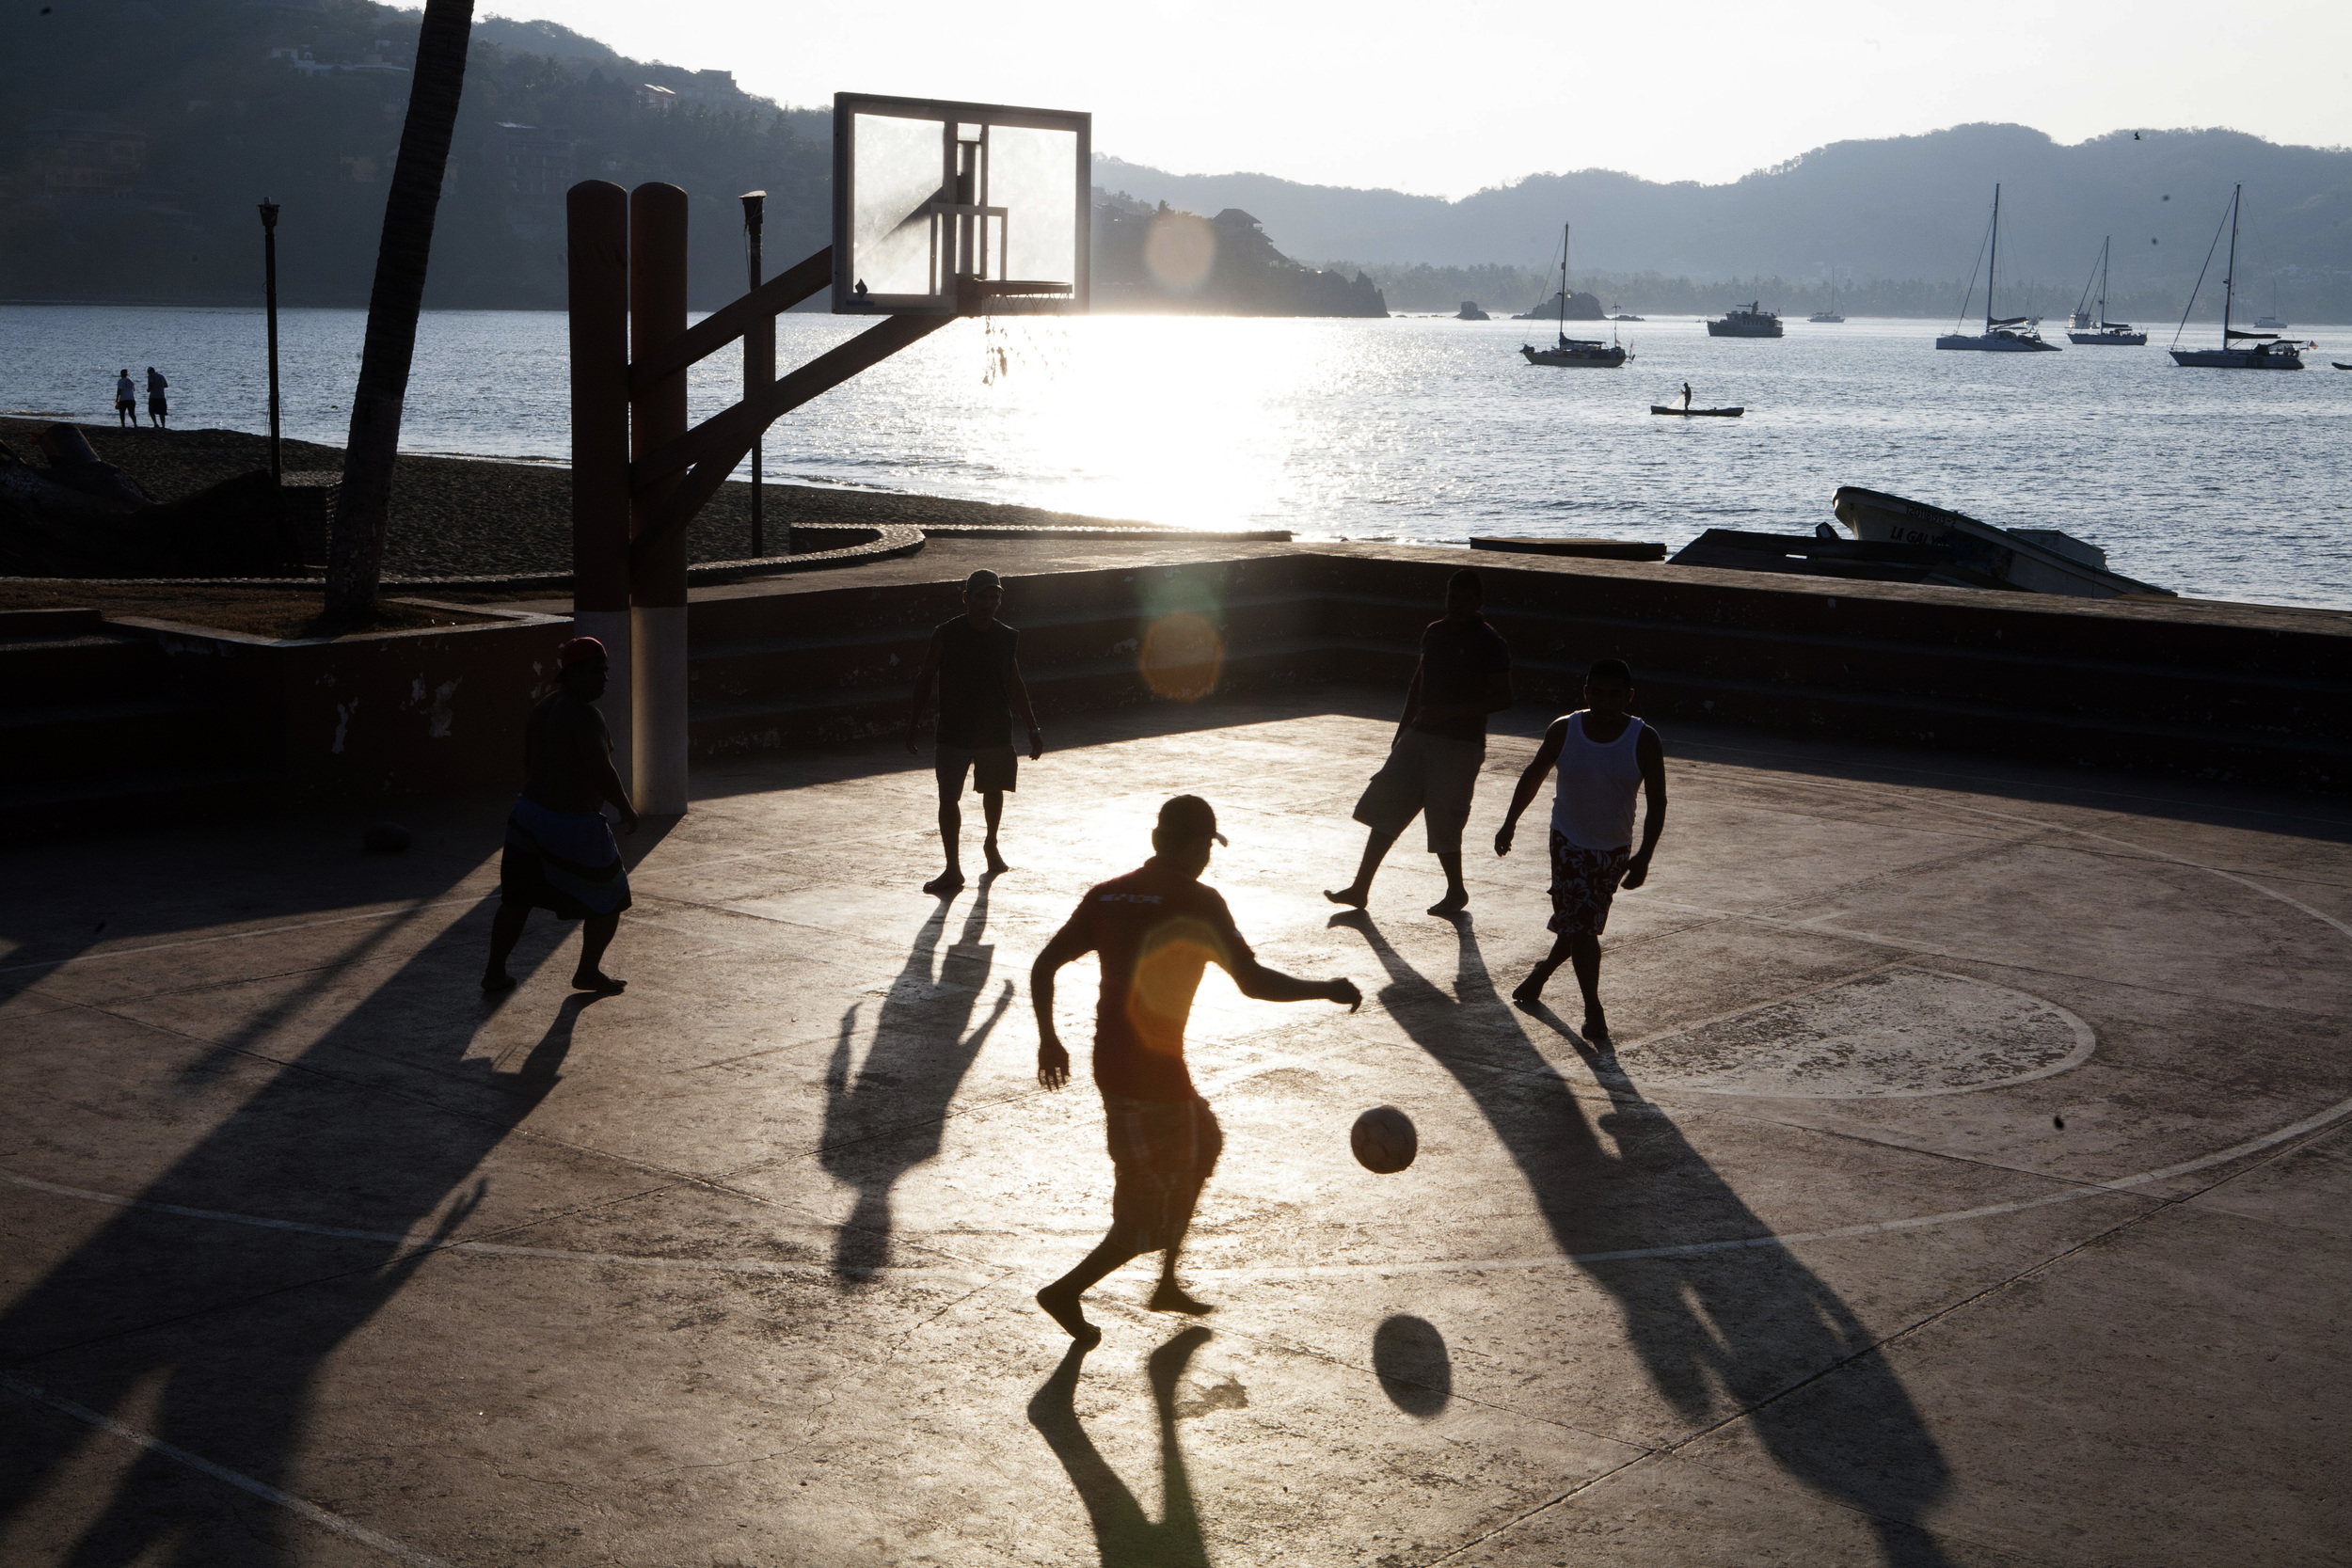  Locals enjoy a game of soccer in the early morning hours at the public basketball court on the waterfront in the main plaza in Zihuatanejo. ©Gail Fisher&nbsp; 